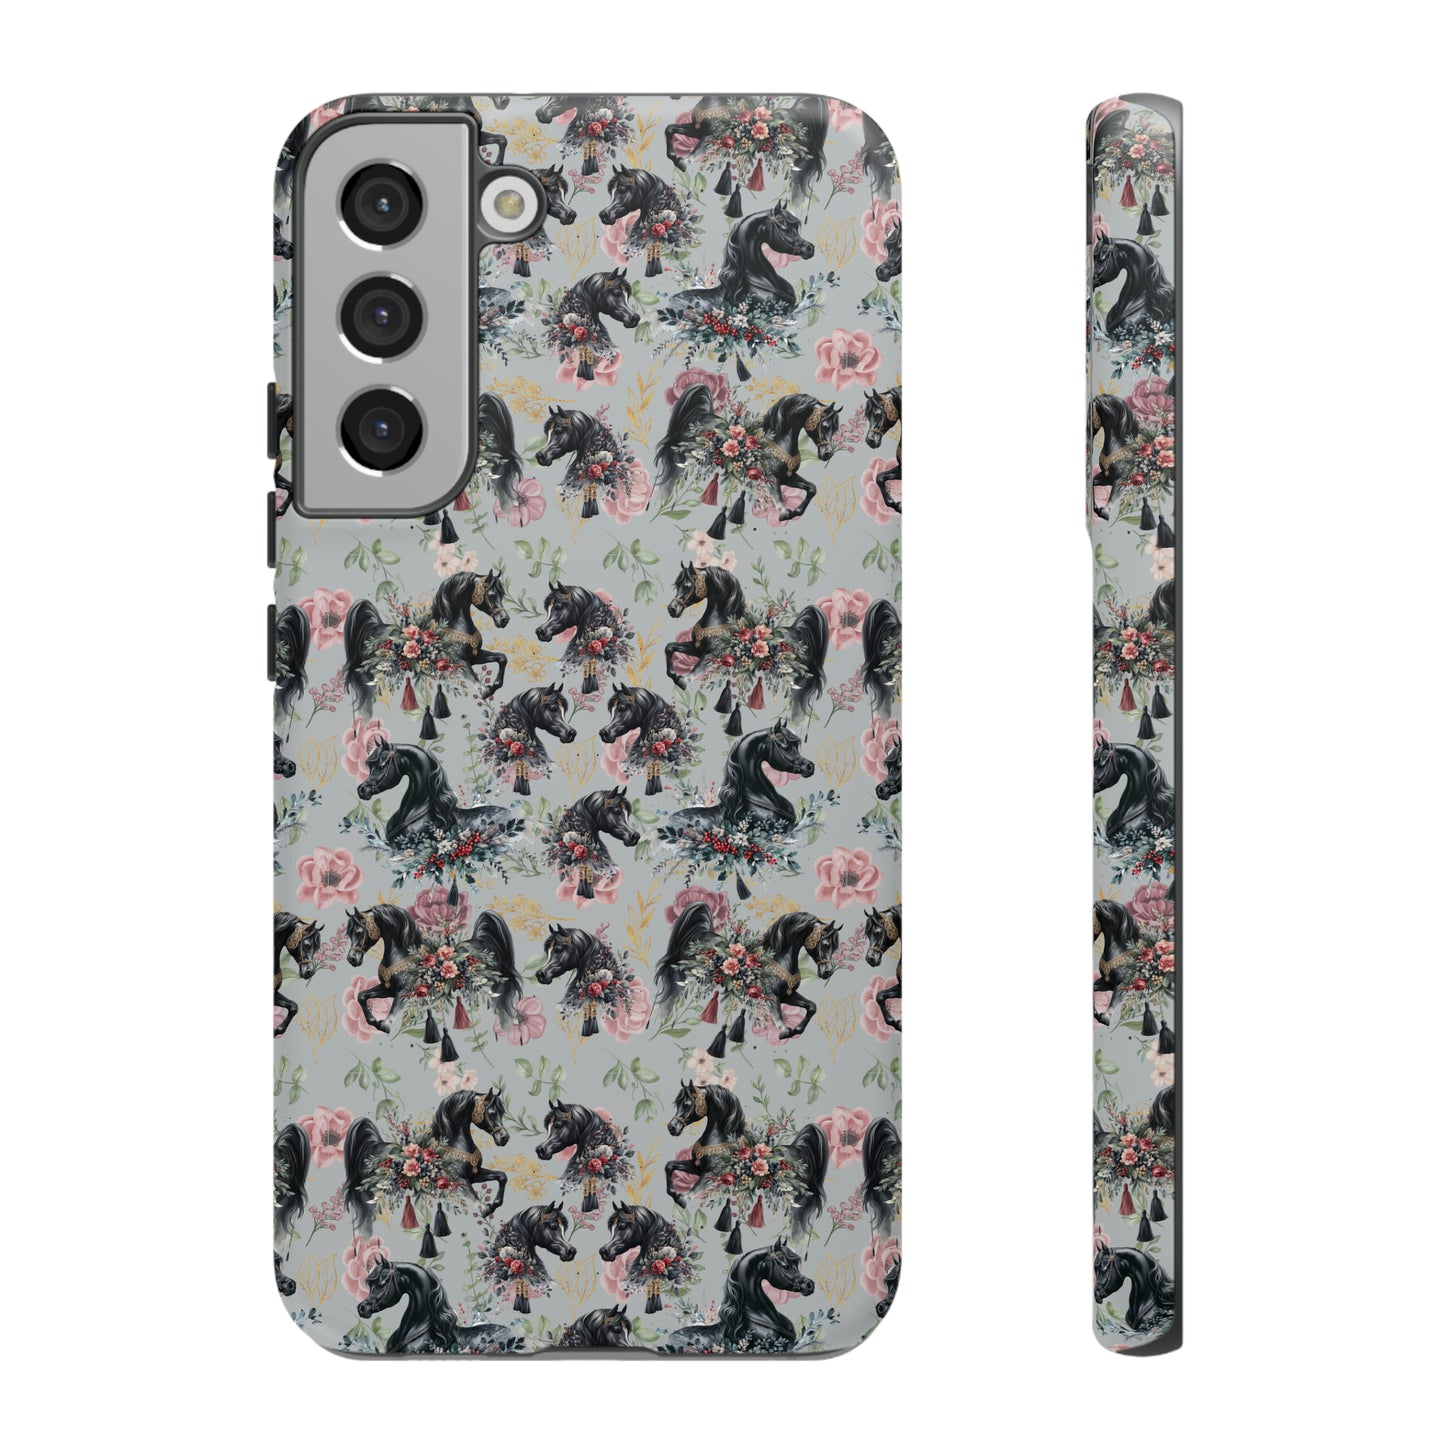 Horse Phone Case Arabian Horse phone case, cases for most all modern phone models, Iphone, Samsung, Pixel Horse art Gift for horse lover